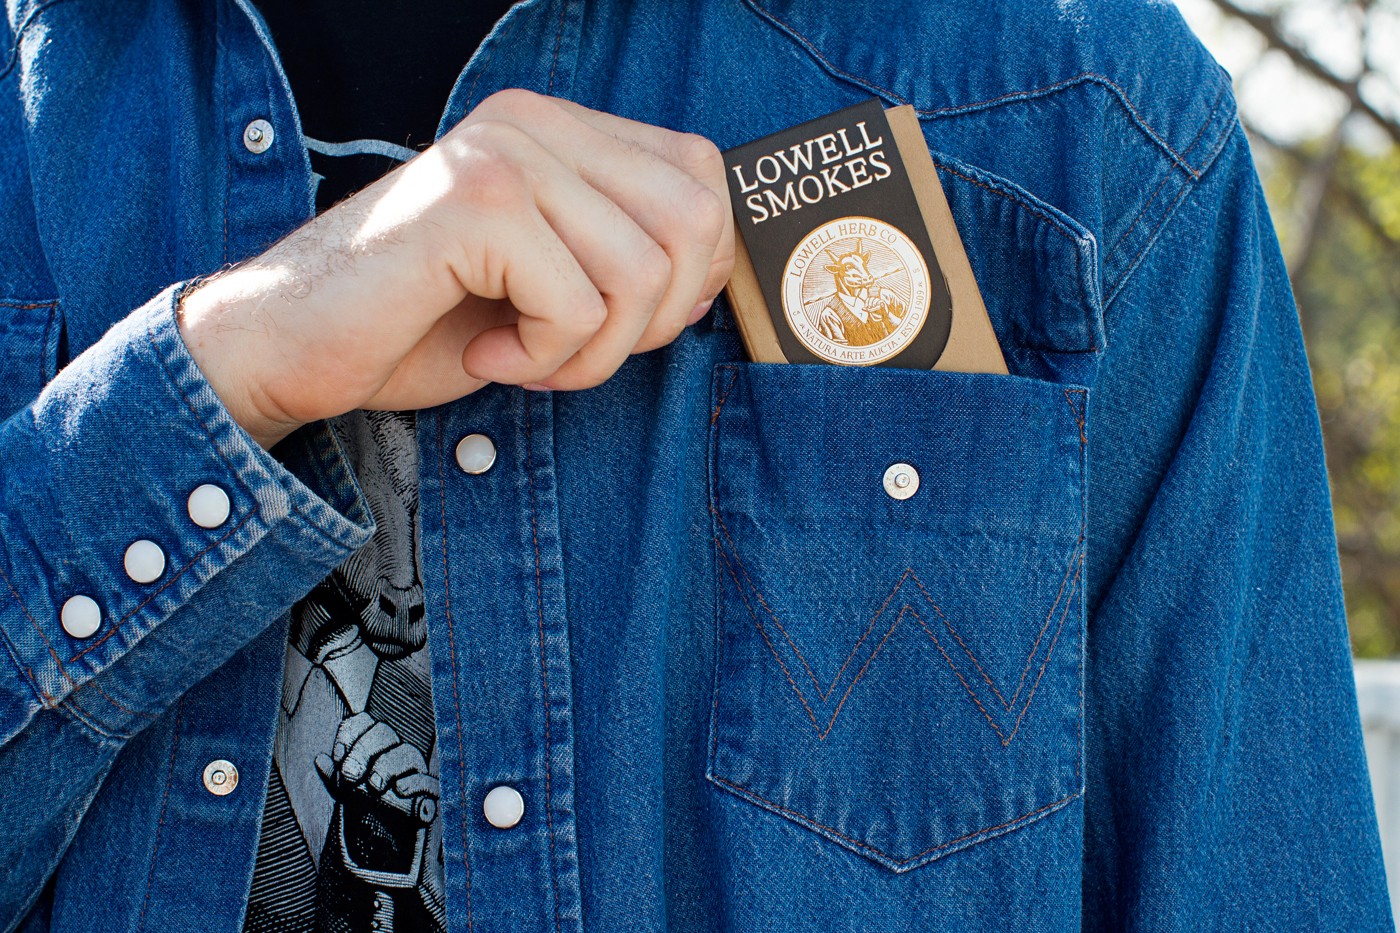 Pack of Lowell Smokes in jean jacket pocket